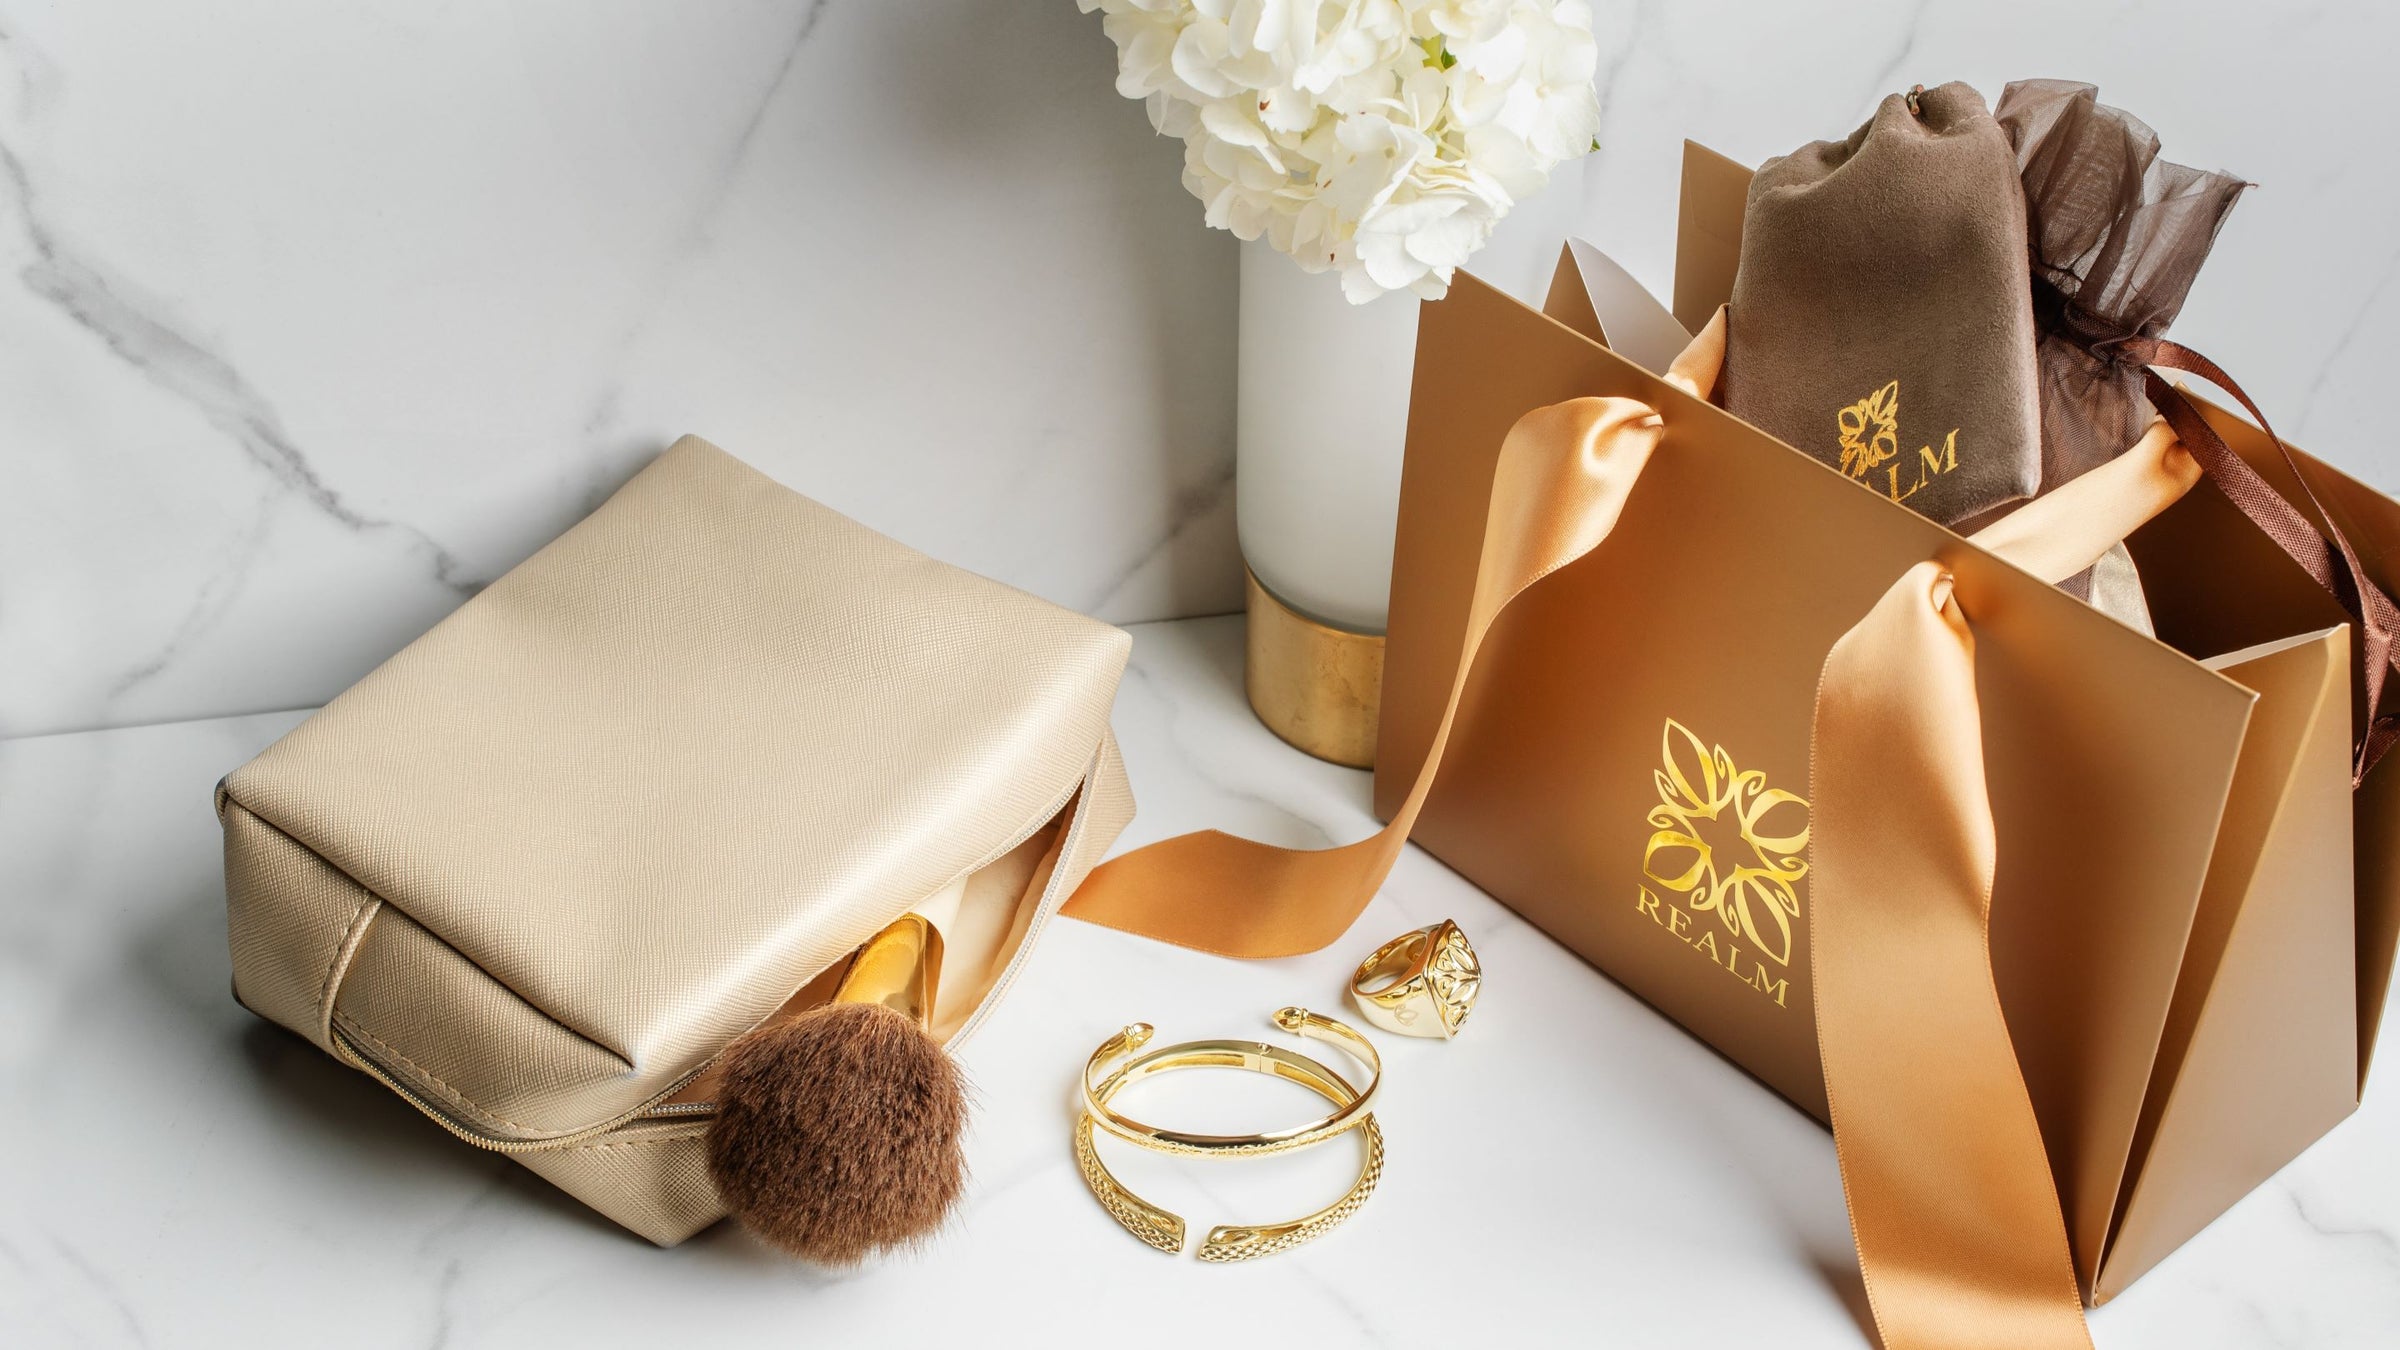 Luxe gift packaging from REALM on vanity with cosmetic case and gold jewelry.